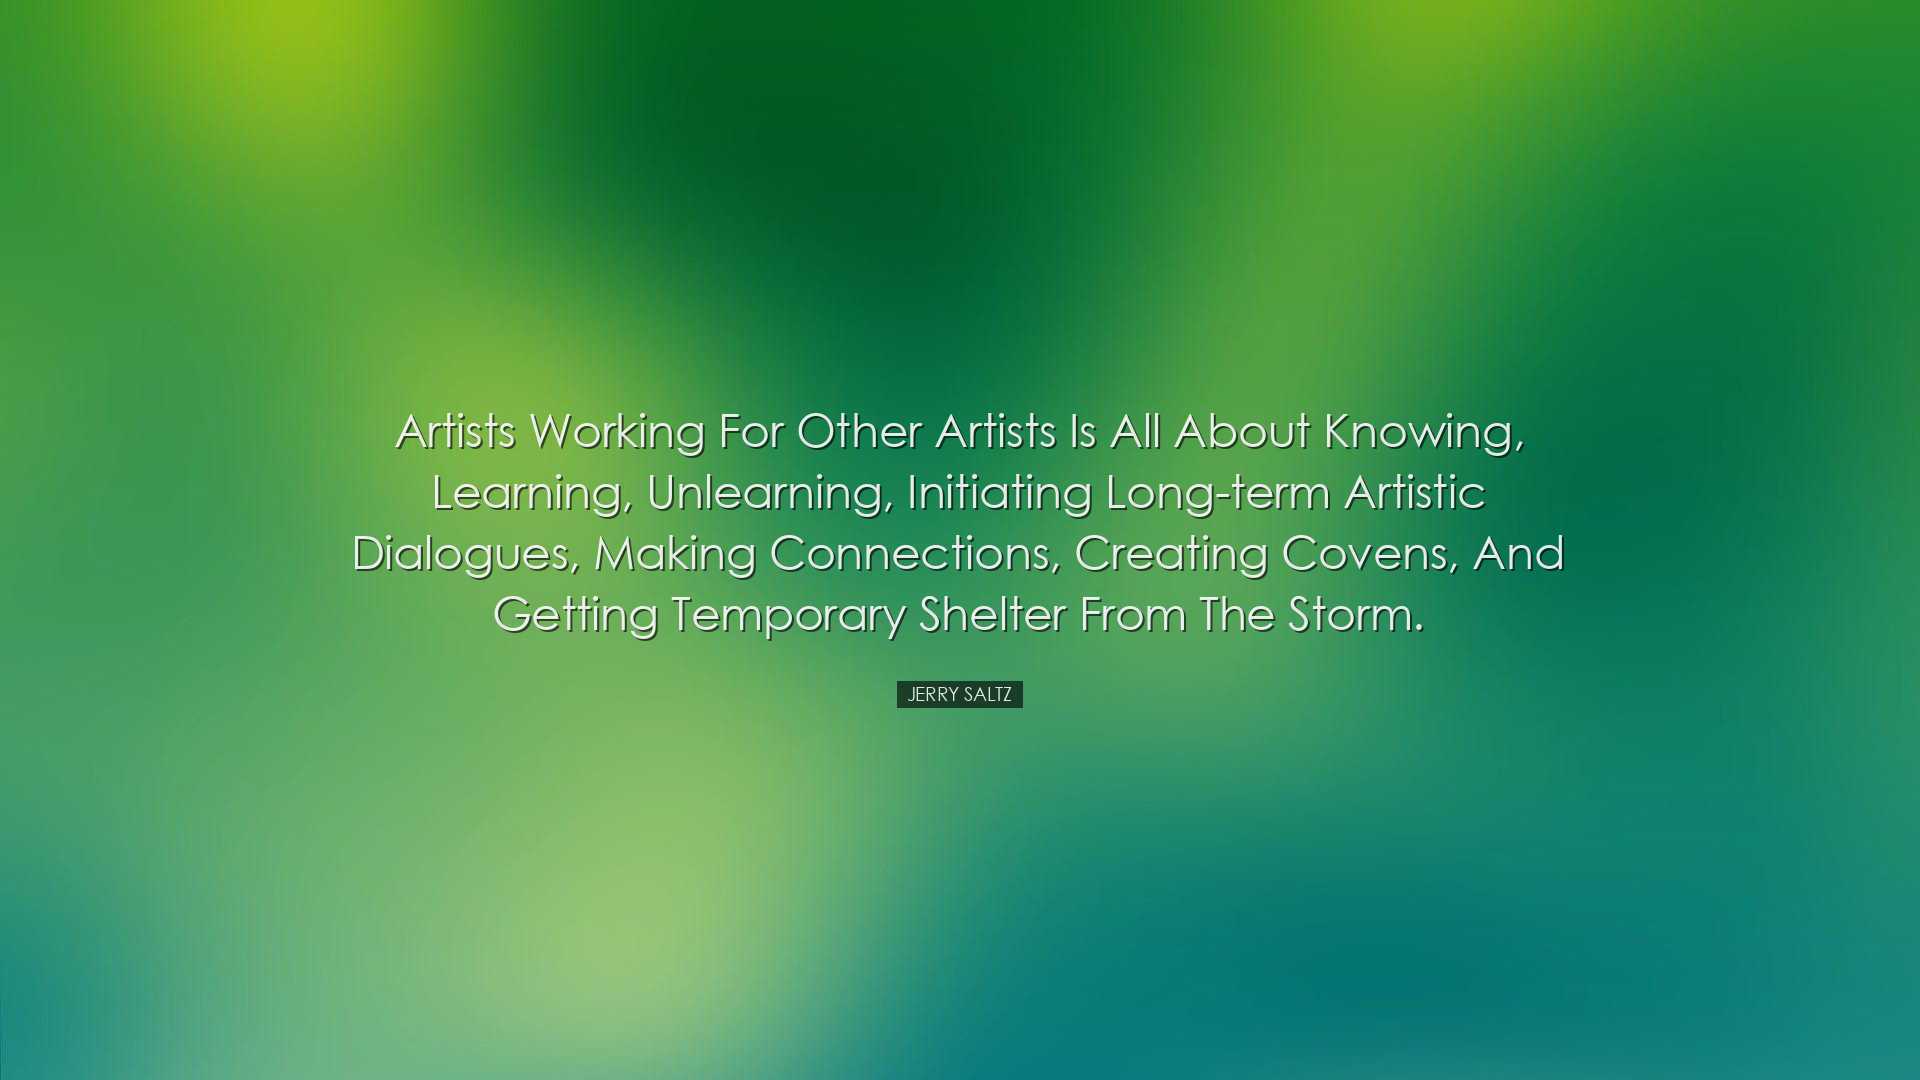 Artists working for other artists is all about knowing, learning,